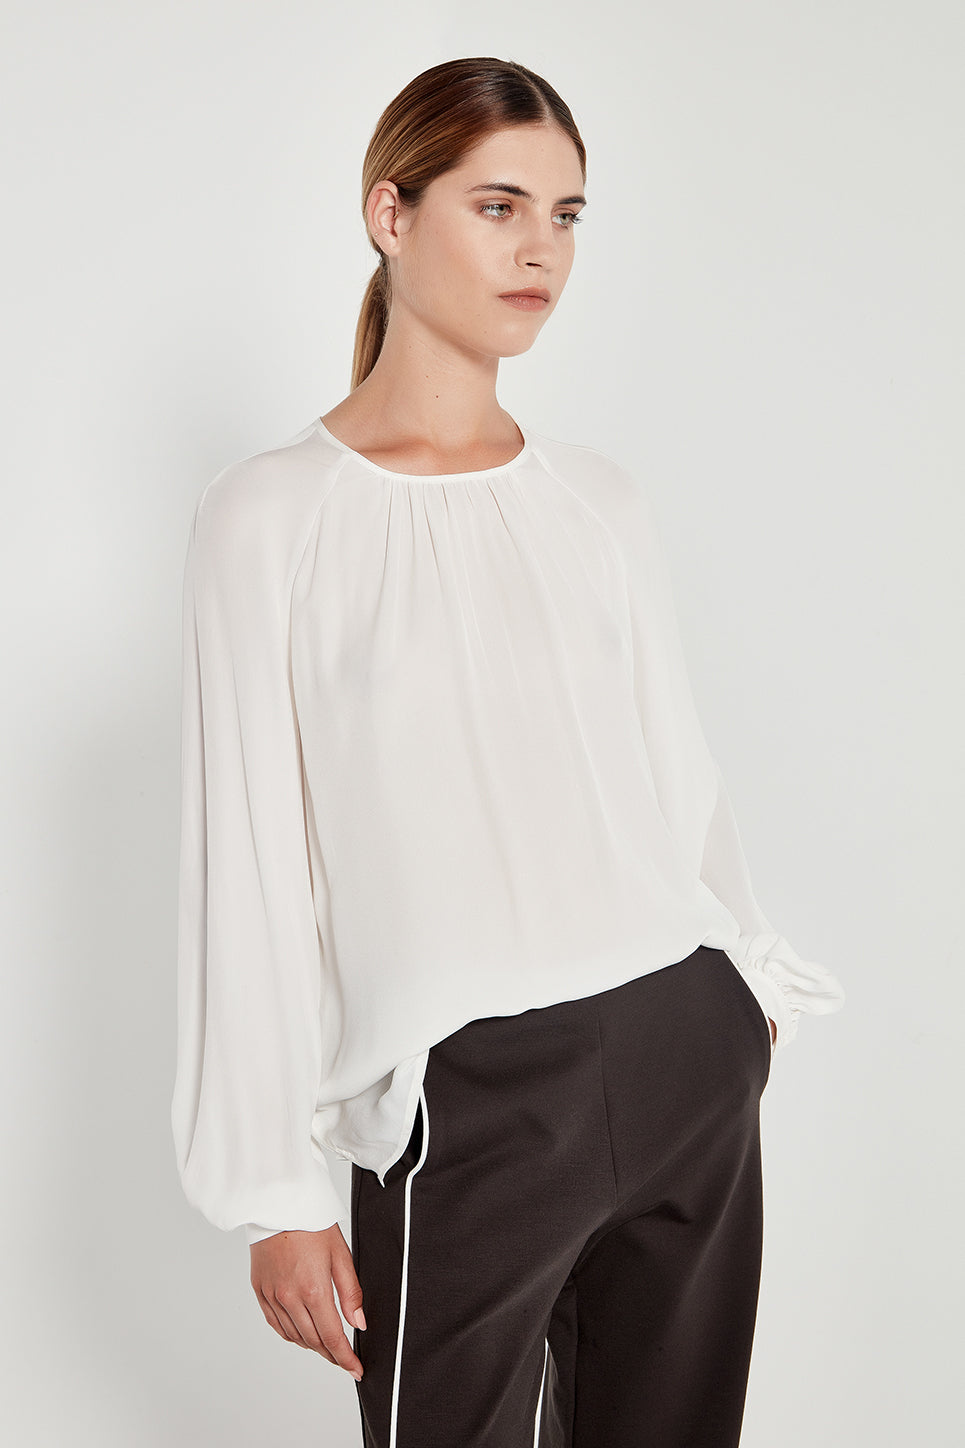 The Lisbon Top in Ivory